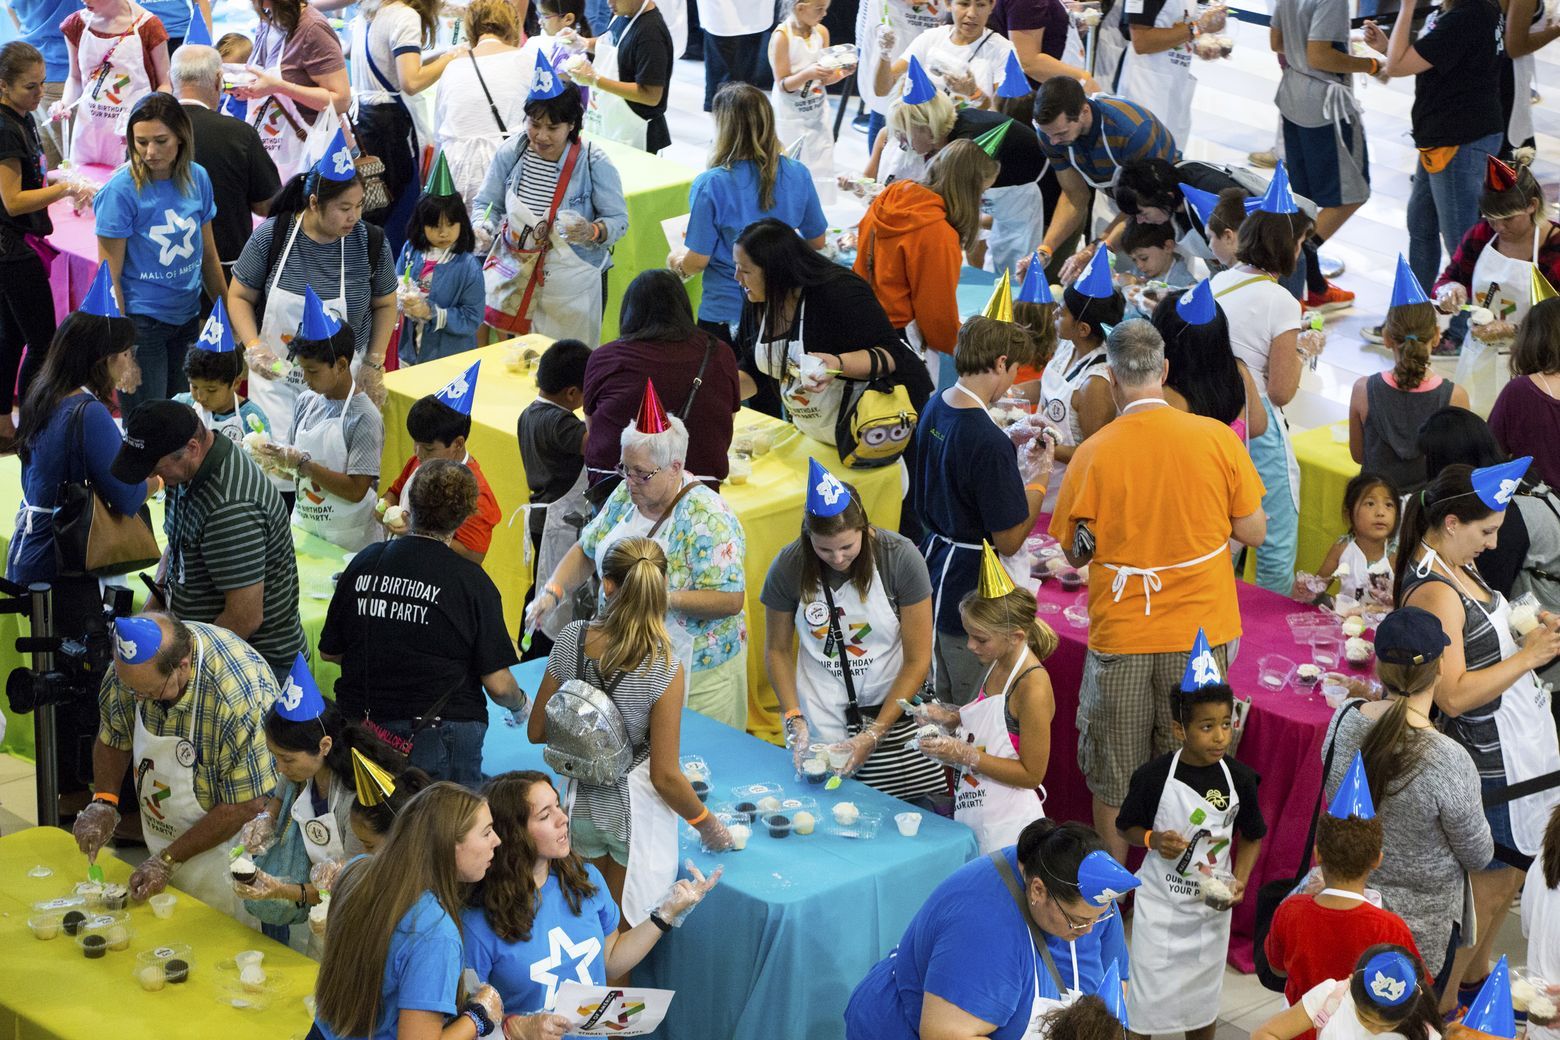  Most cupcakes iced in an hour: world record set at Mall of America (VIDEO)
   